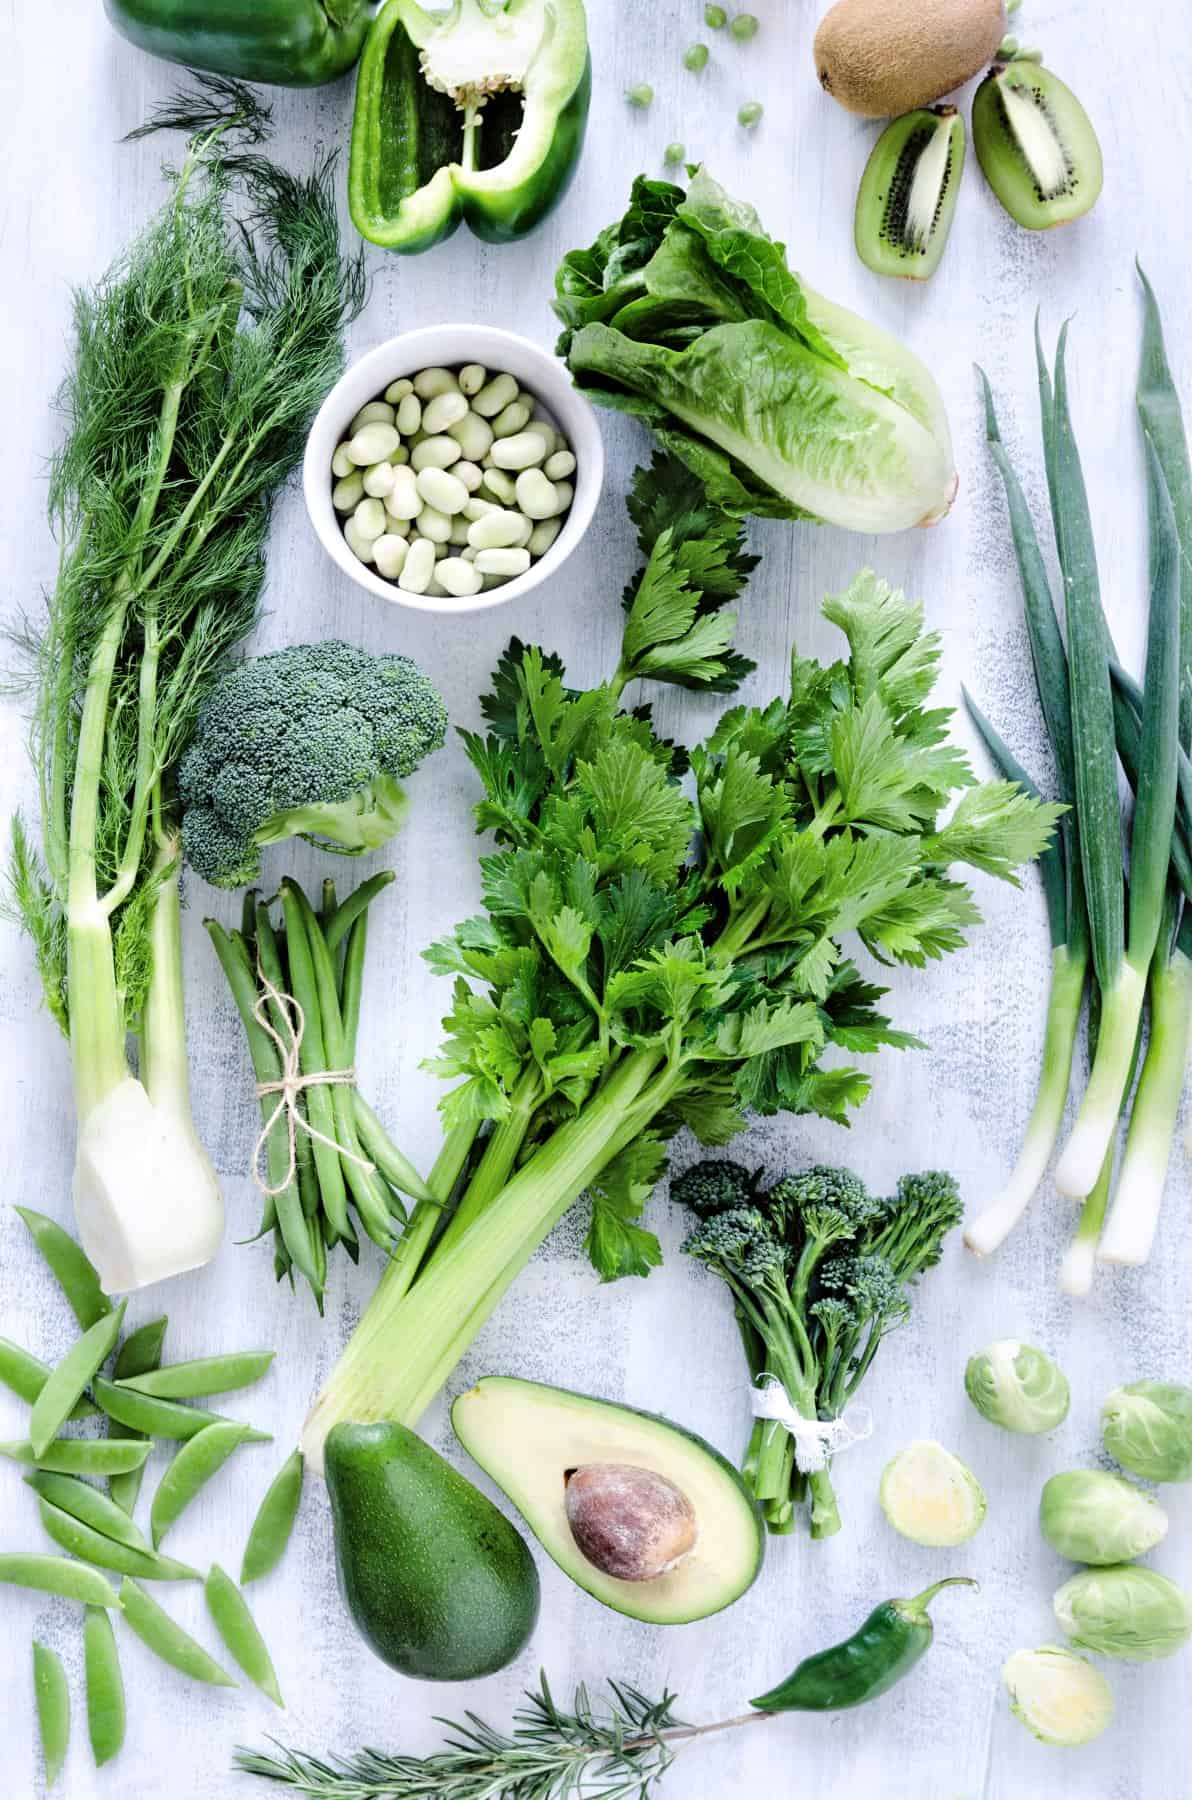 Collection of green vegetables on rustic white background from overhead, broccoli, celery, avocado, brussel sprouts, kiwi, pepper, peas, beans, lettuce,